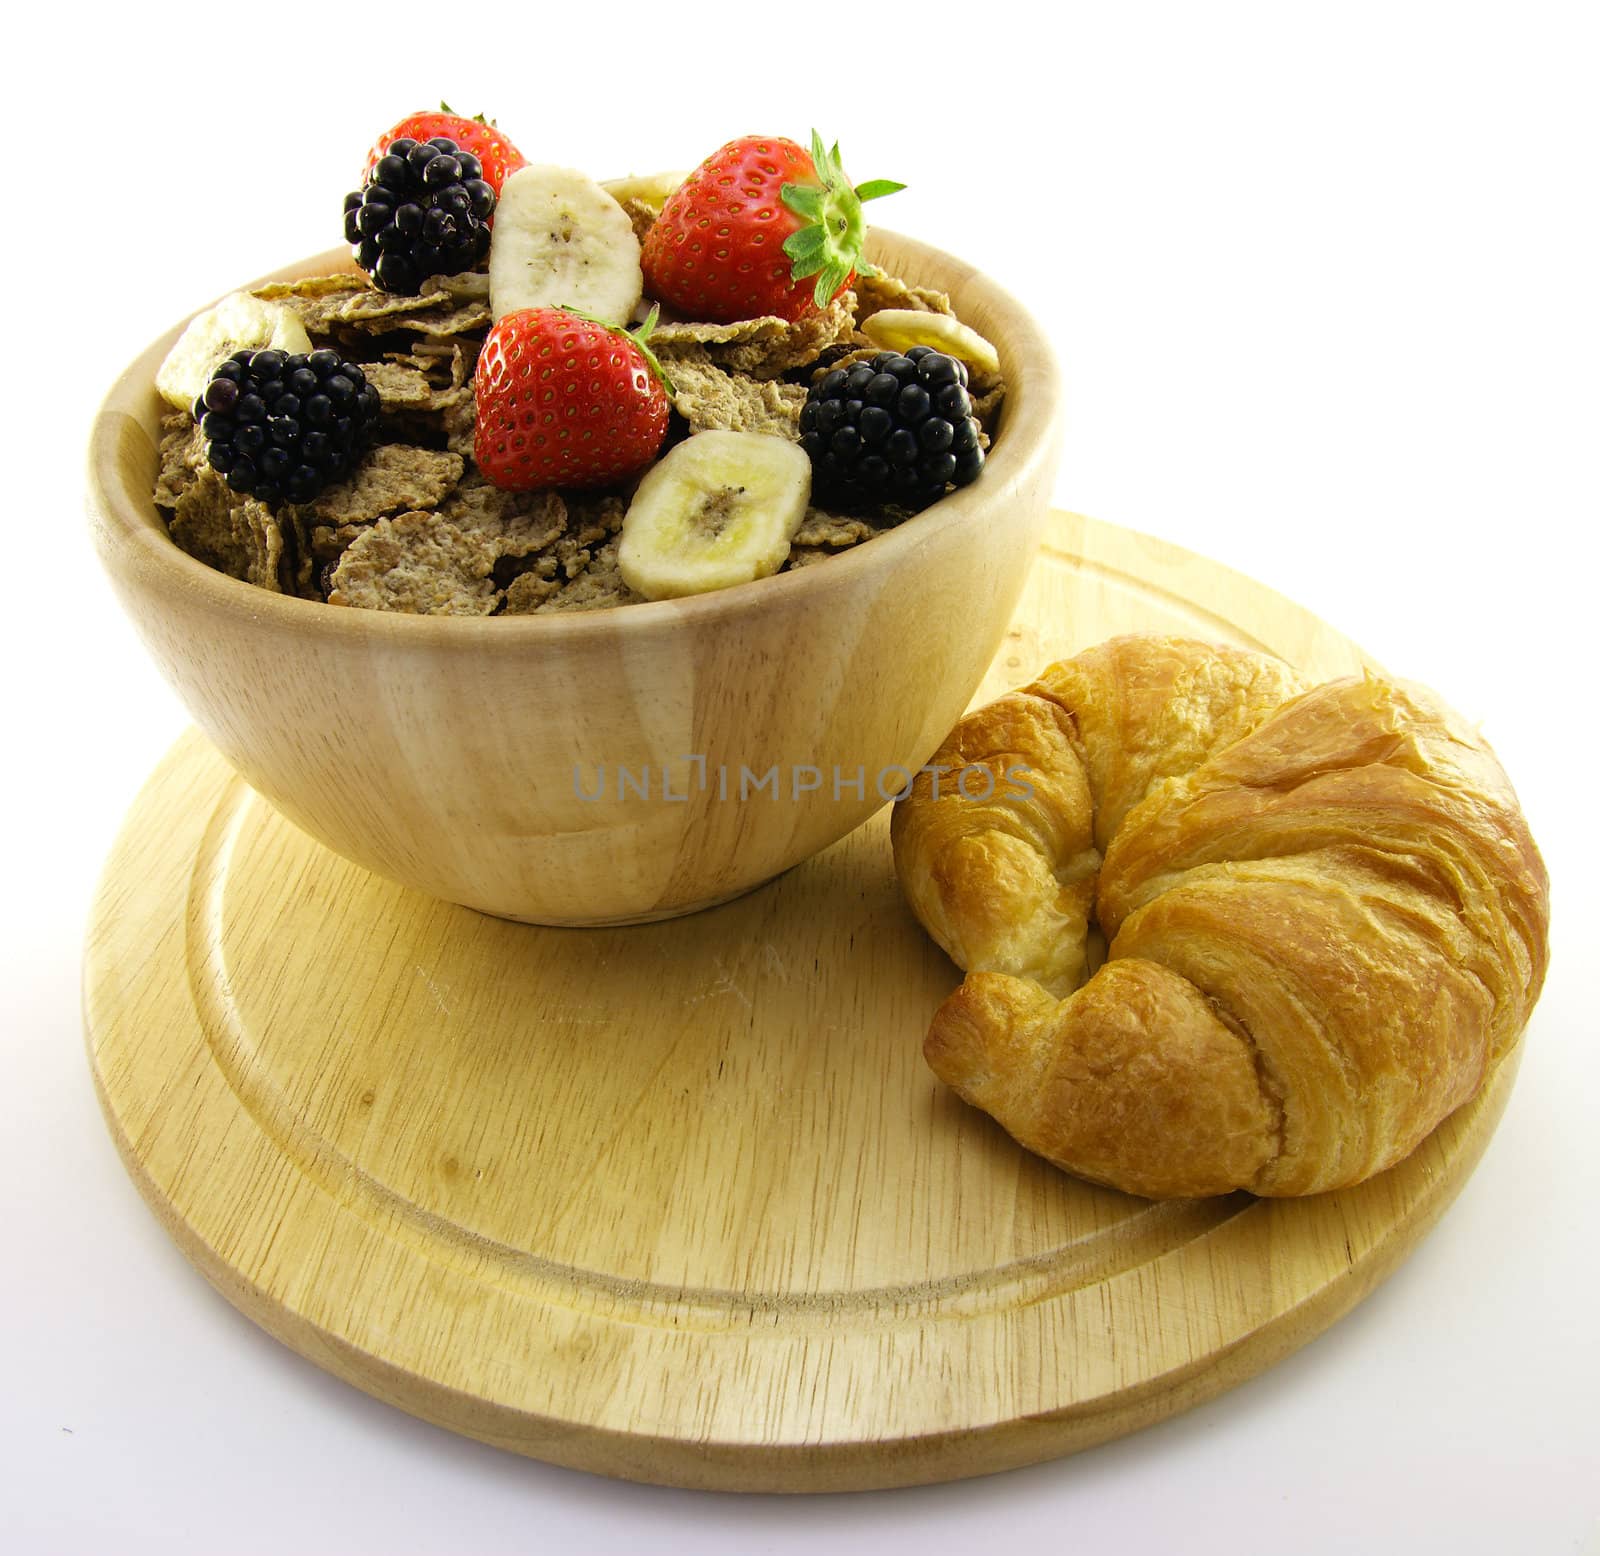 Crunchy looking delicious bran flakes and juicy fruit in a wooden bowl with a croissant on a white background